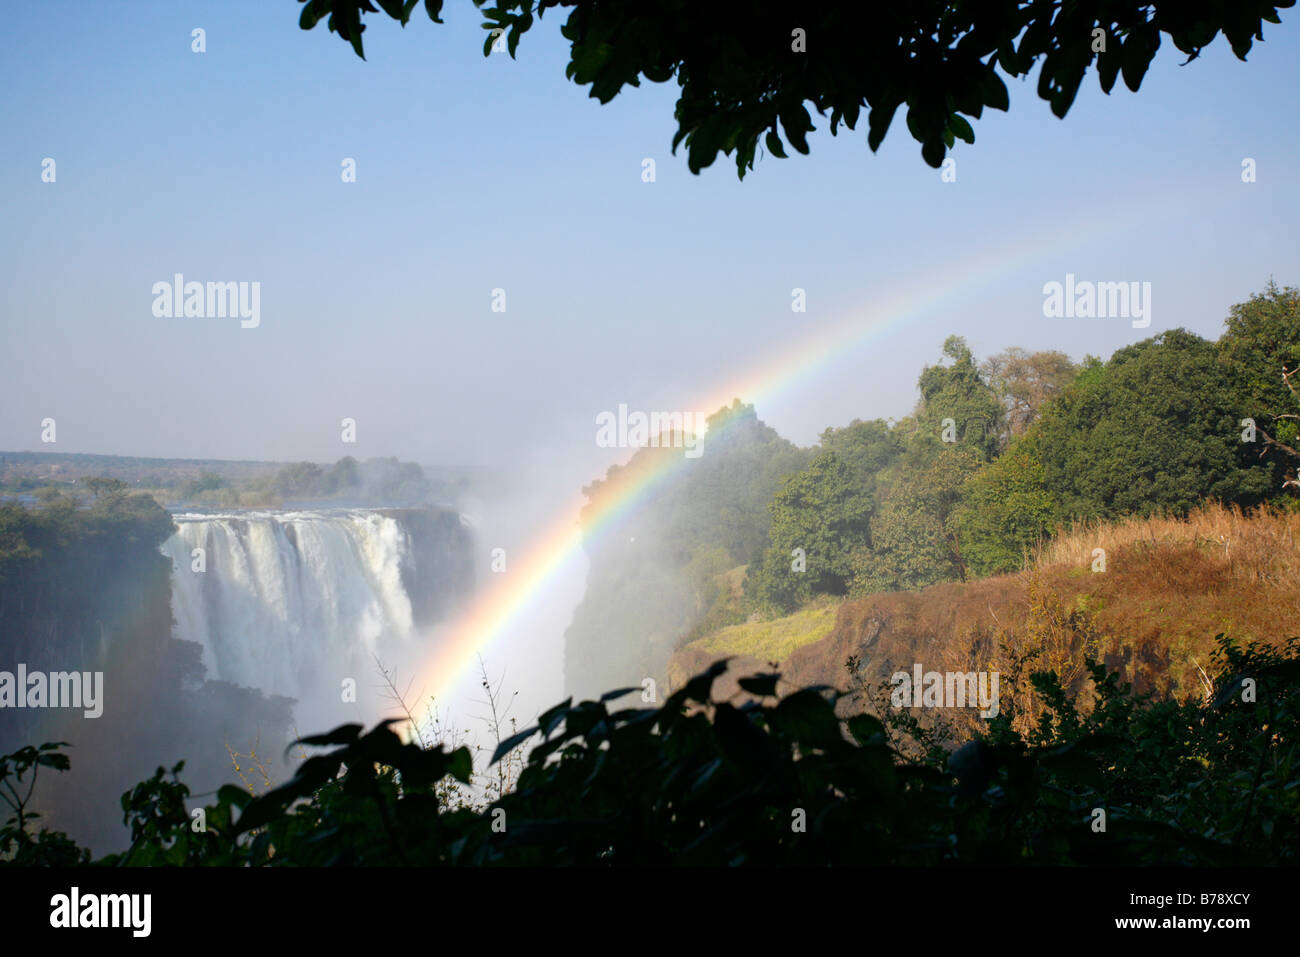 Victoria falls on the Zambezi river with a rainbow and lush rainforest vegetation in the foreground Stock Photo